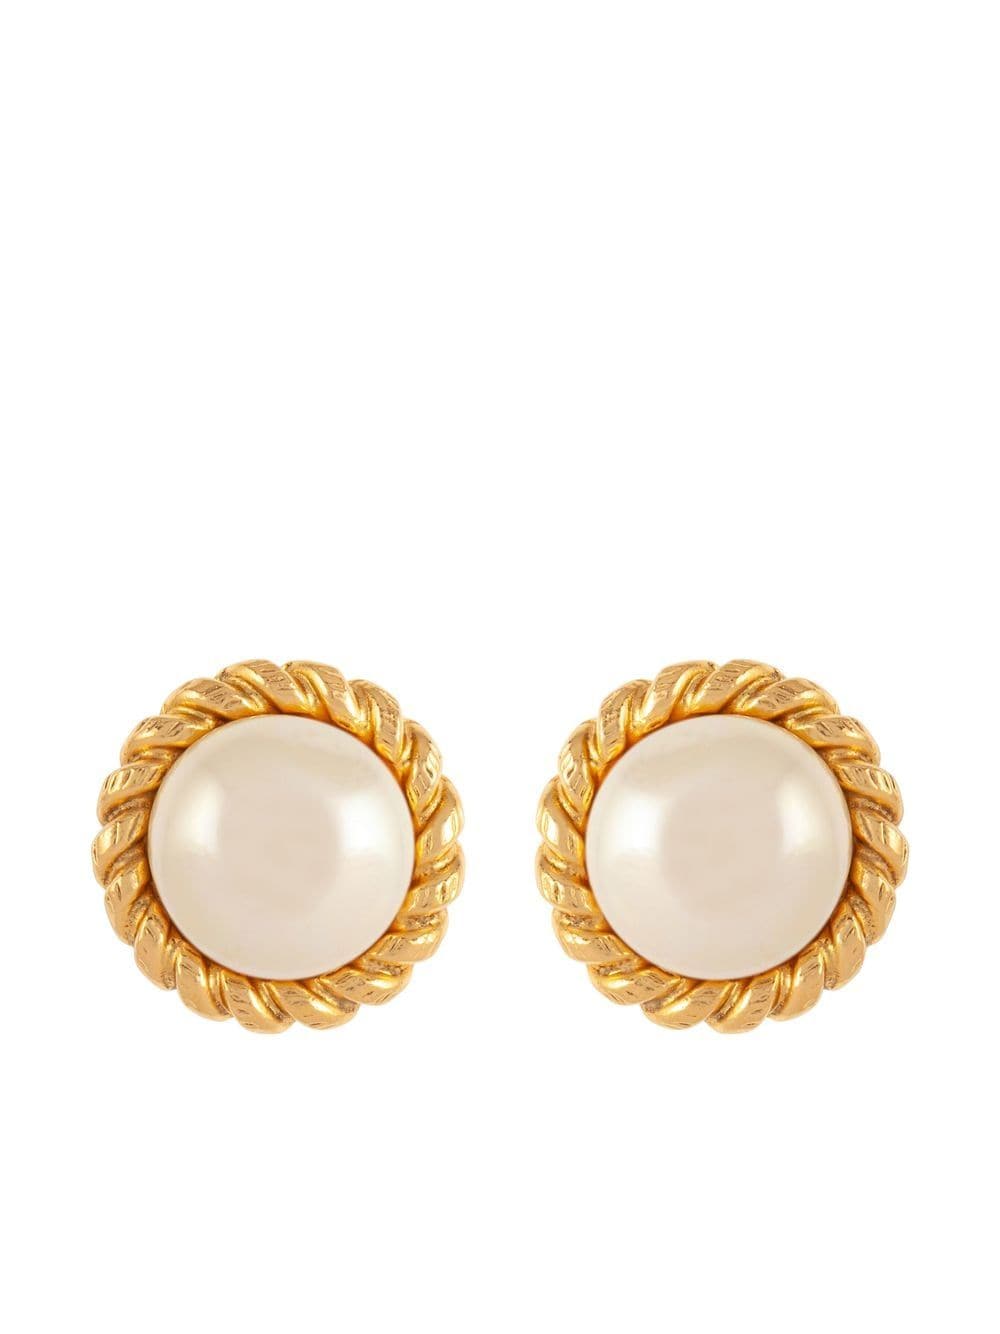 Chanel Pre-Owned 1980s faux-pearl clip-on earrings - Gold